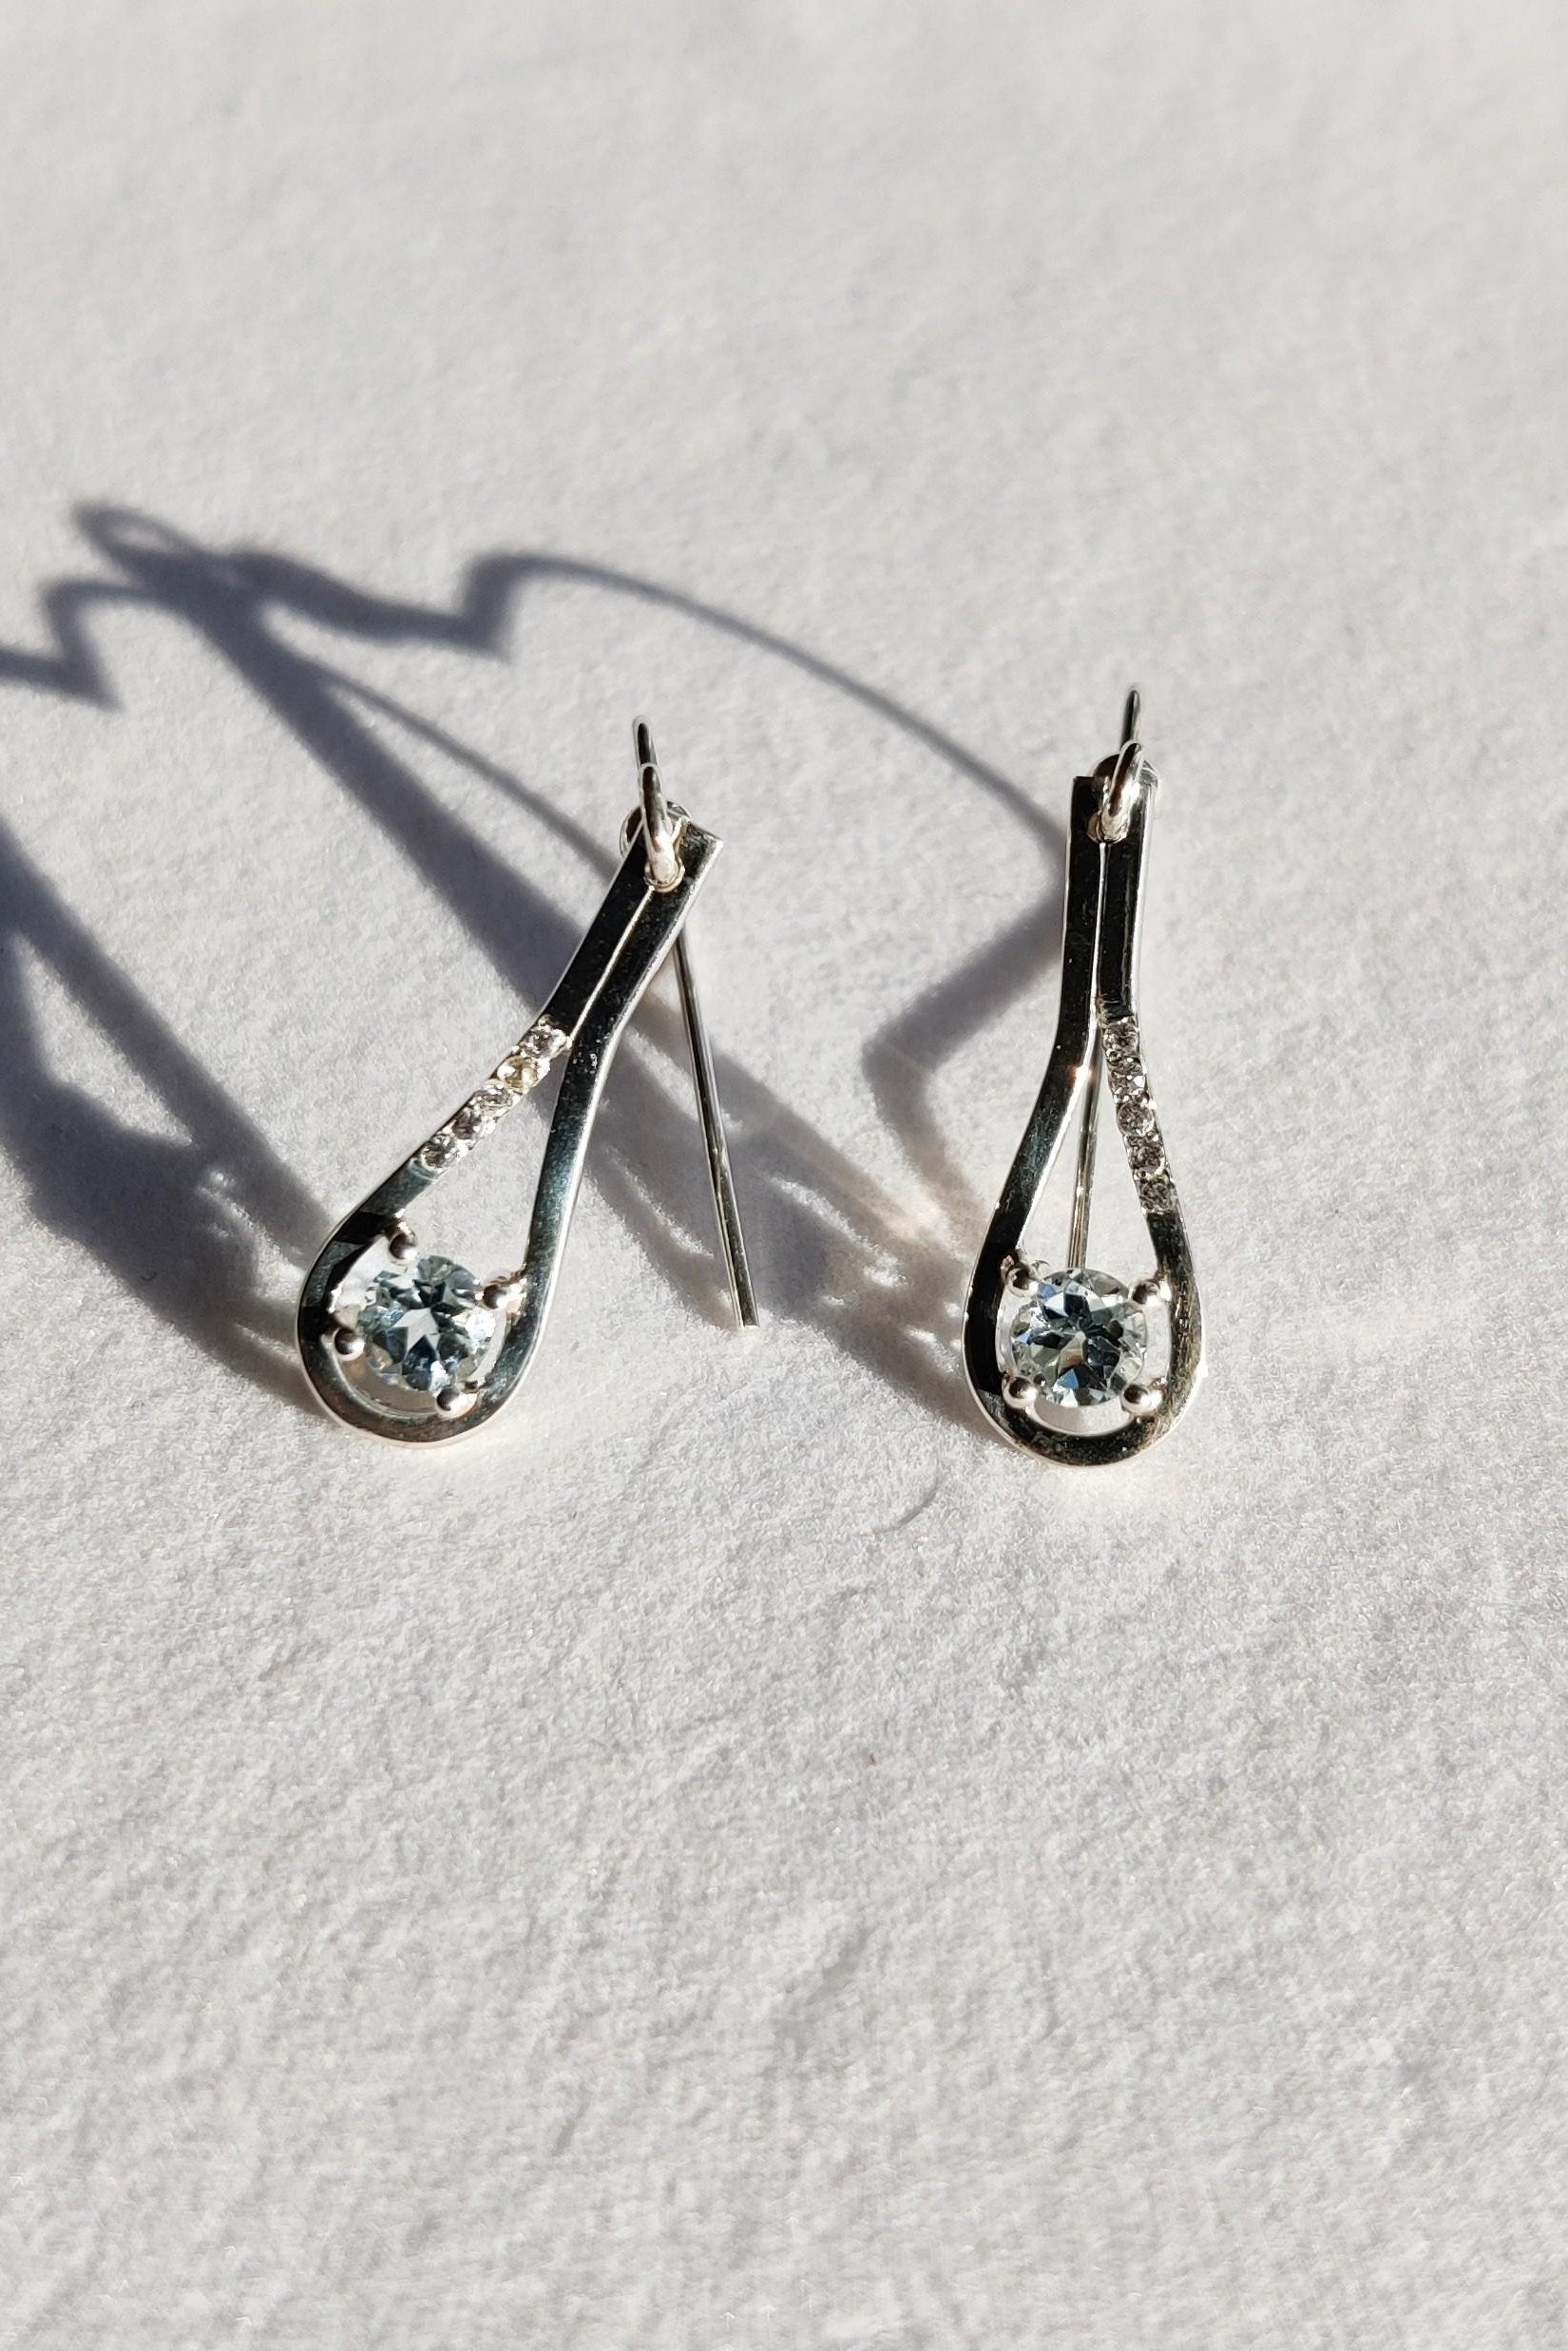 Silver Earrings with Aquamarine and White Diamonds-The Diamond Setter